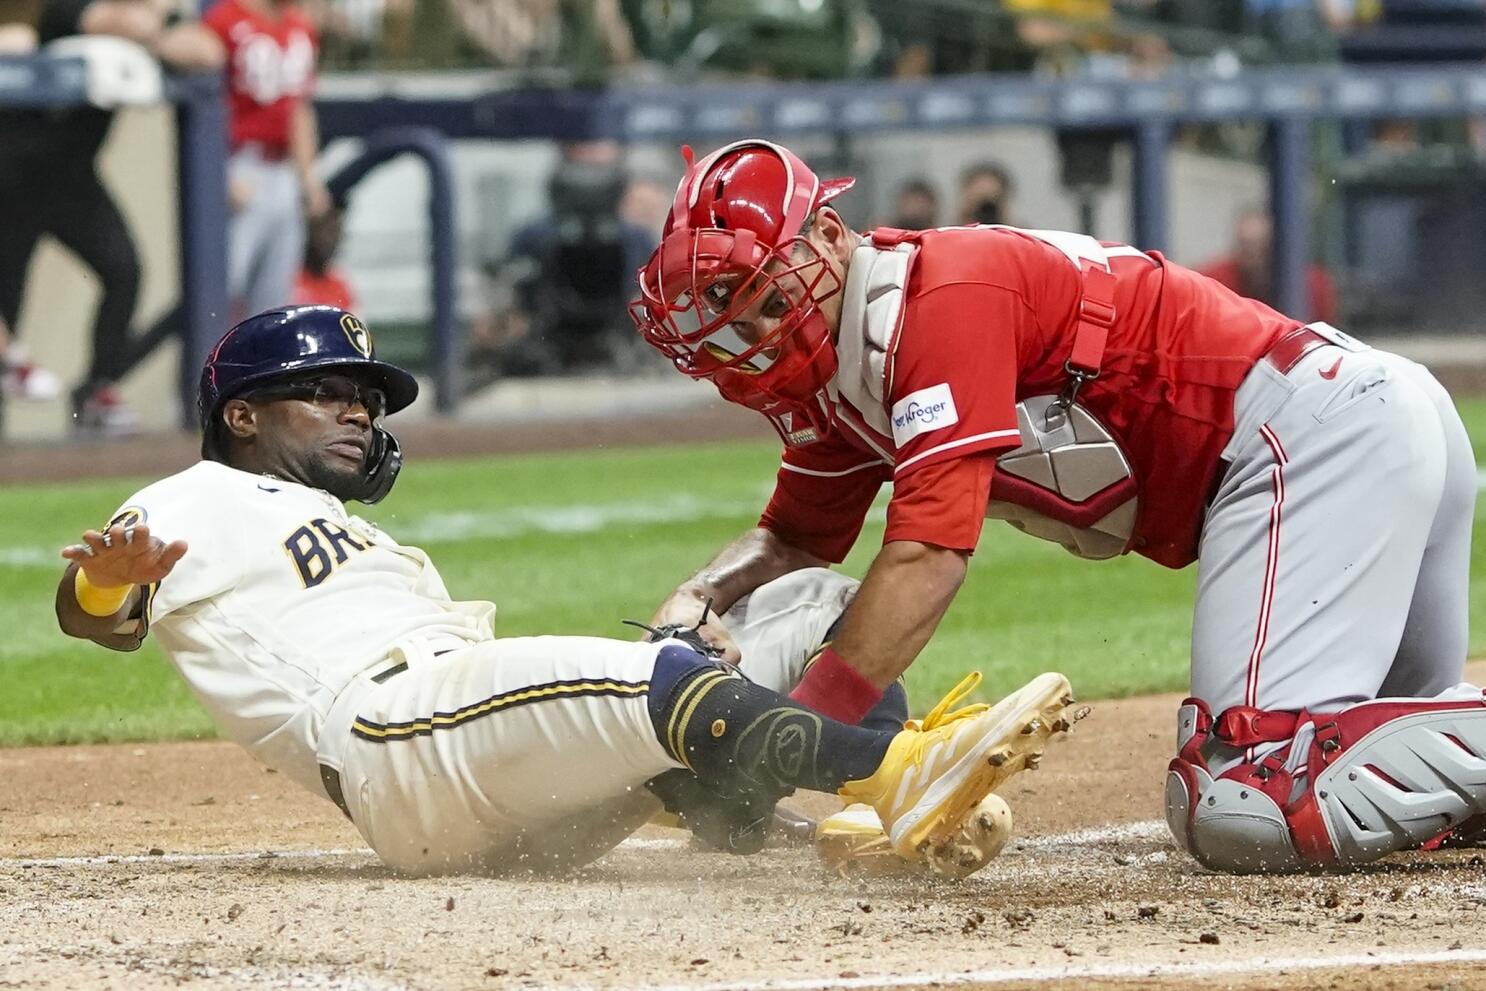 Brewers rally to beat Reds 4-3, open 2-game NL Central lead